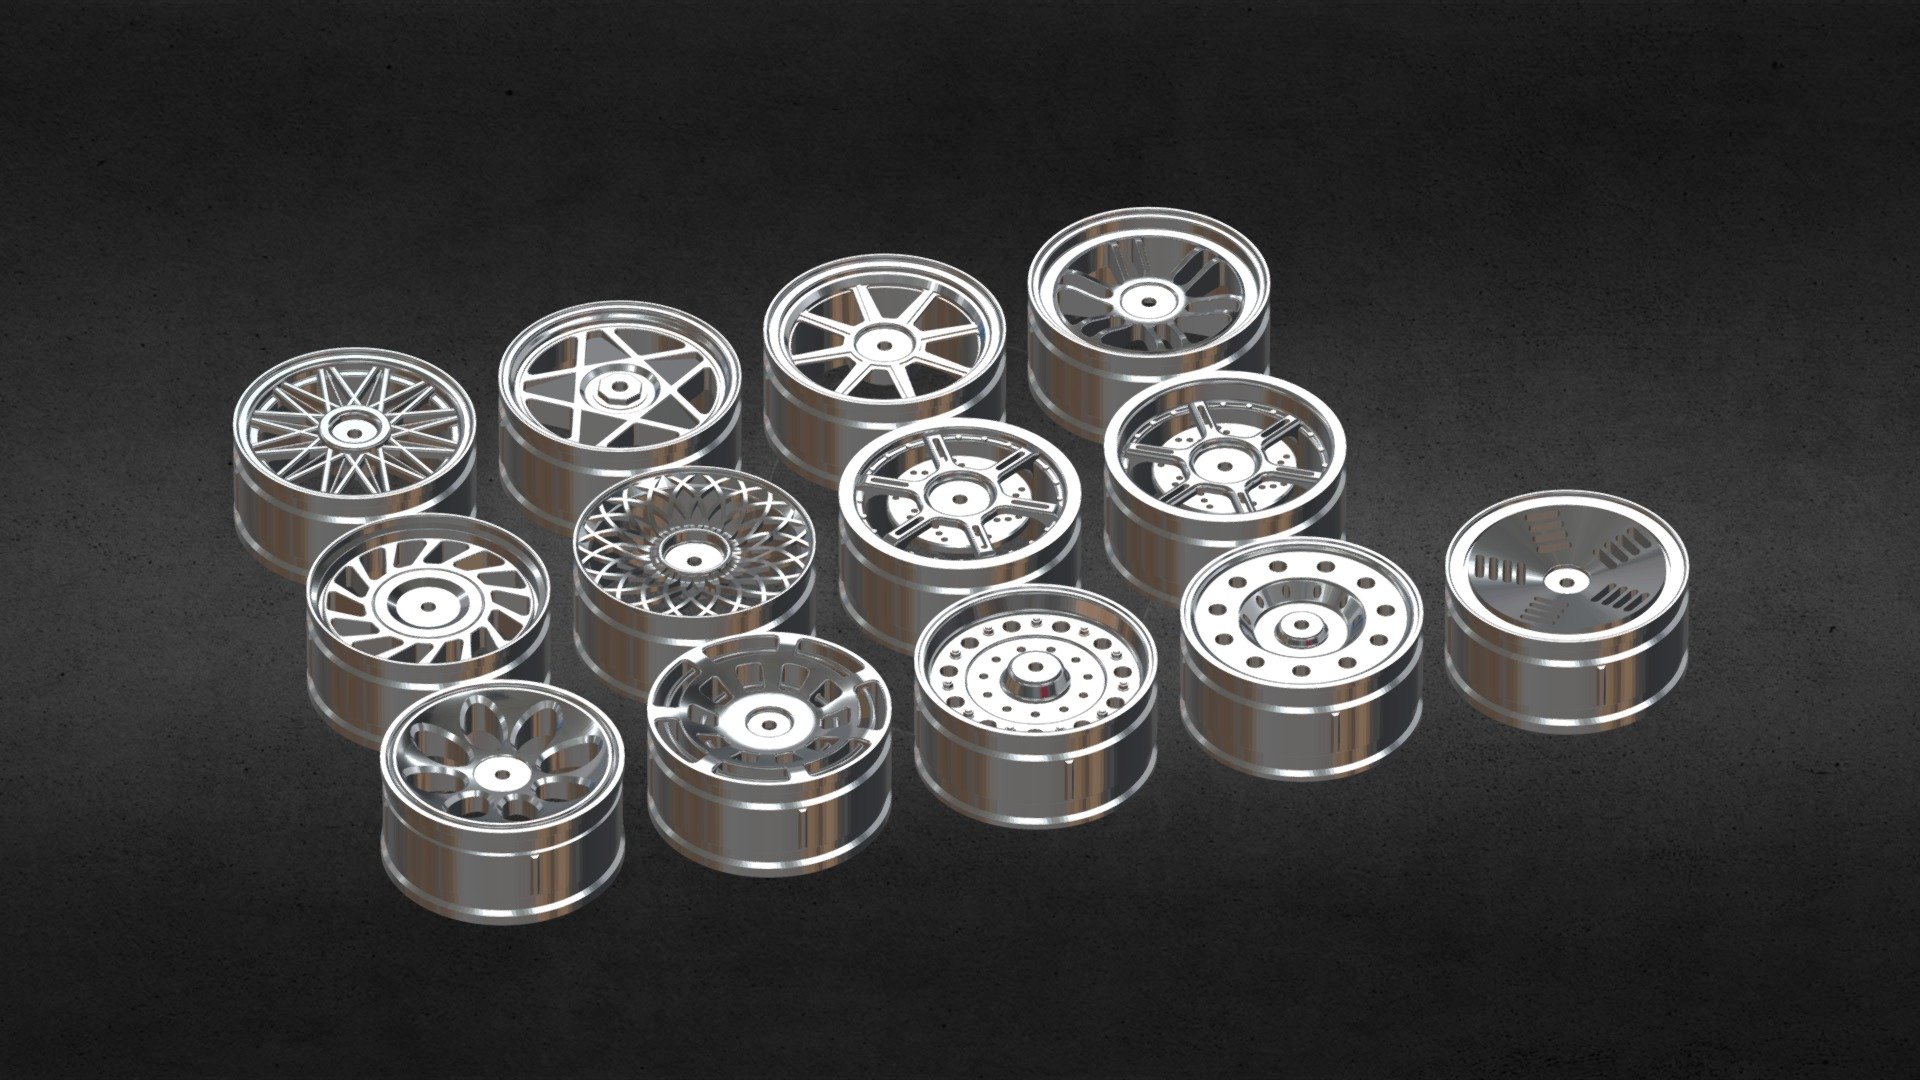 ULTIMATE WHEEL PACK BY IMAGIGOO

In this pack, you will find 13 different models of rims

FREE Download - Blender 3.0 - Low Poly - High detais - By Imagigoo

For more models click here (everything is free !!) : https://sketchfab.com/Imagigoo - Alloy Wheel Rims (Free) - Download Free 3D model by Imagigoo 3d model